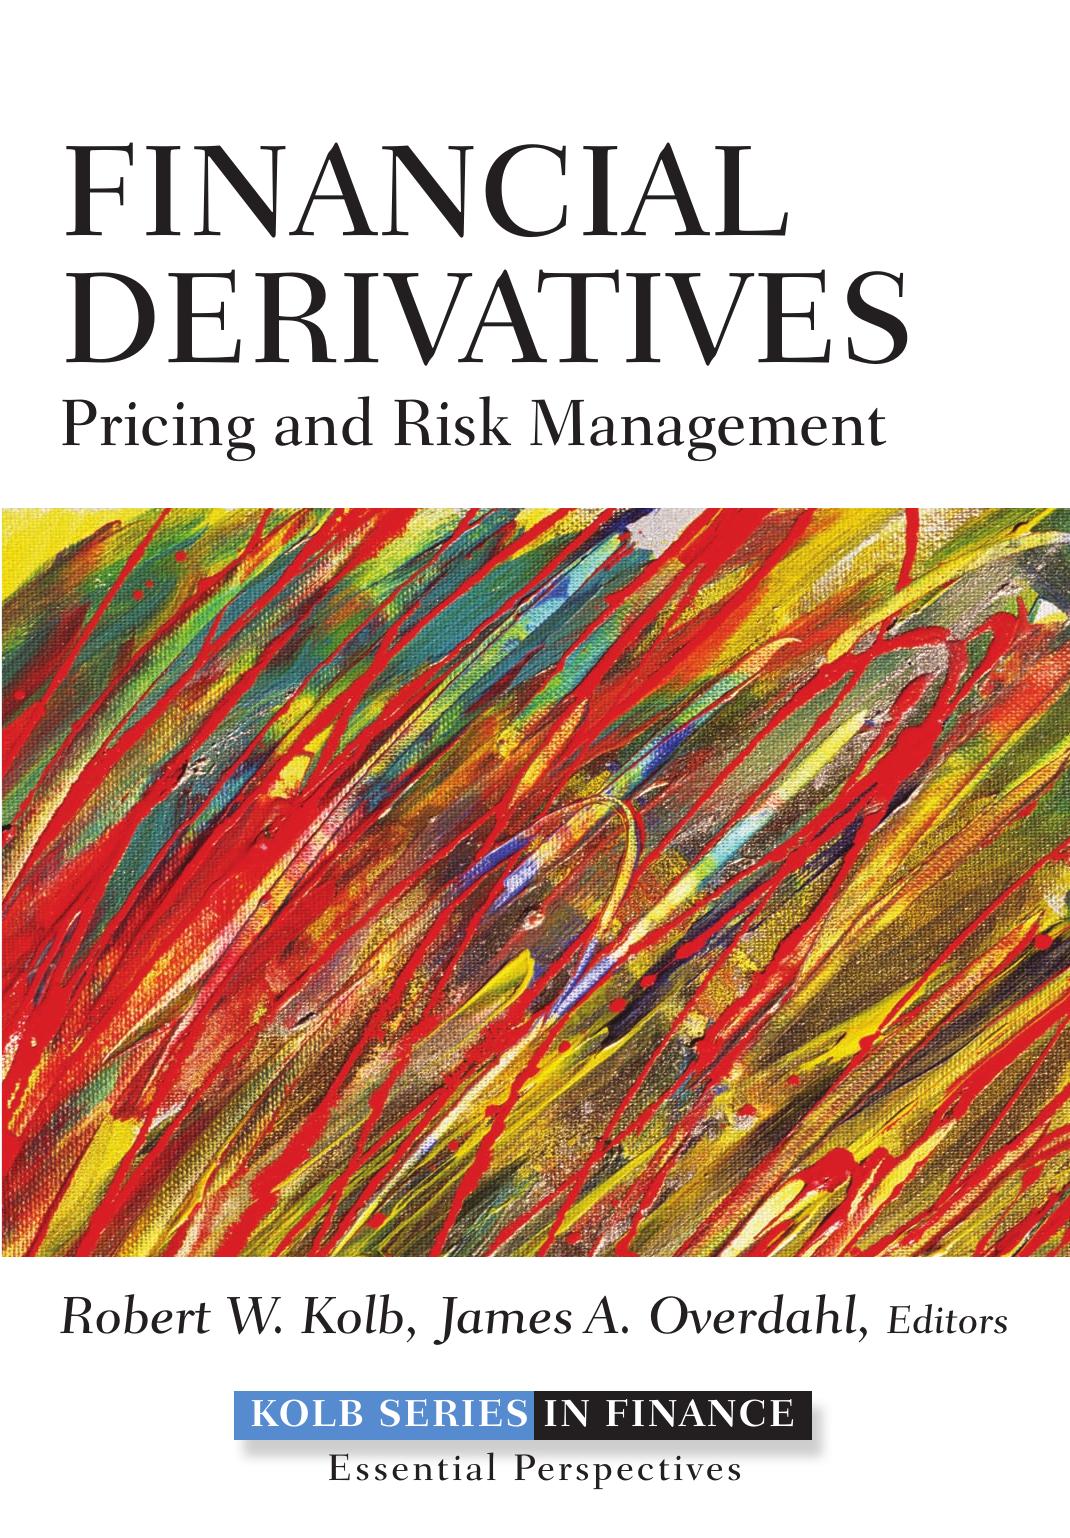 ebooksclub.org  Financial Derivatives  Pricing and Risk Management  Robert W  Kolb Series in Finance 2010